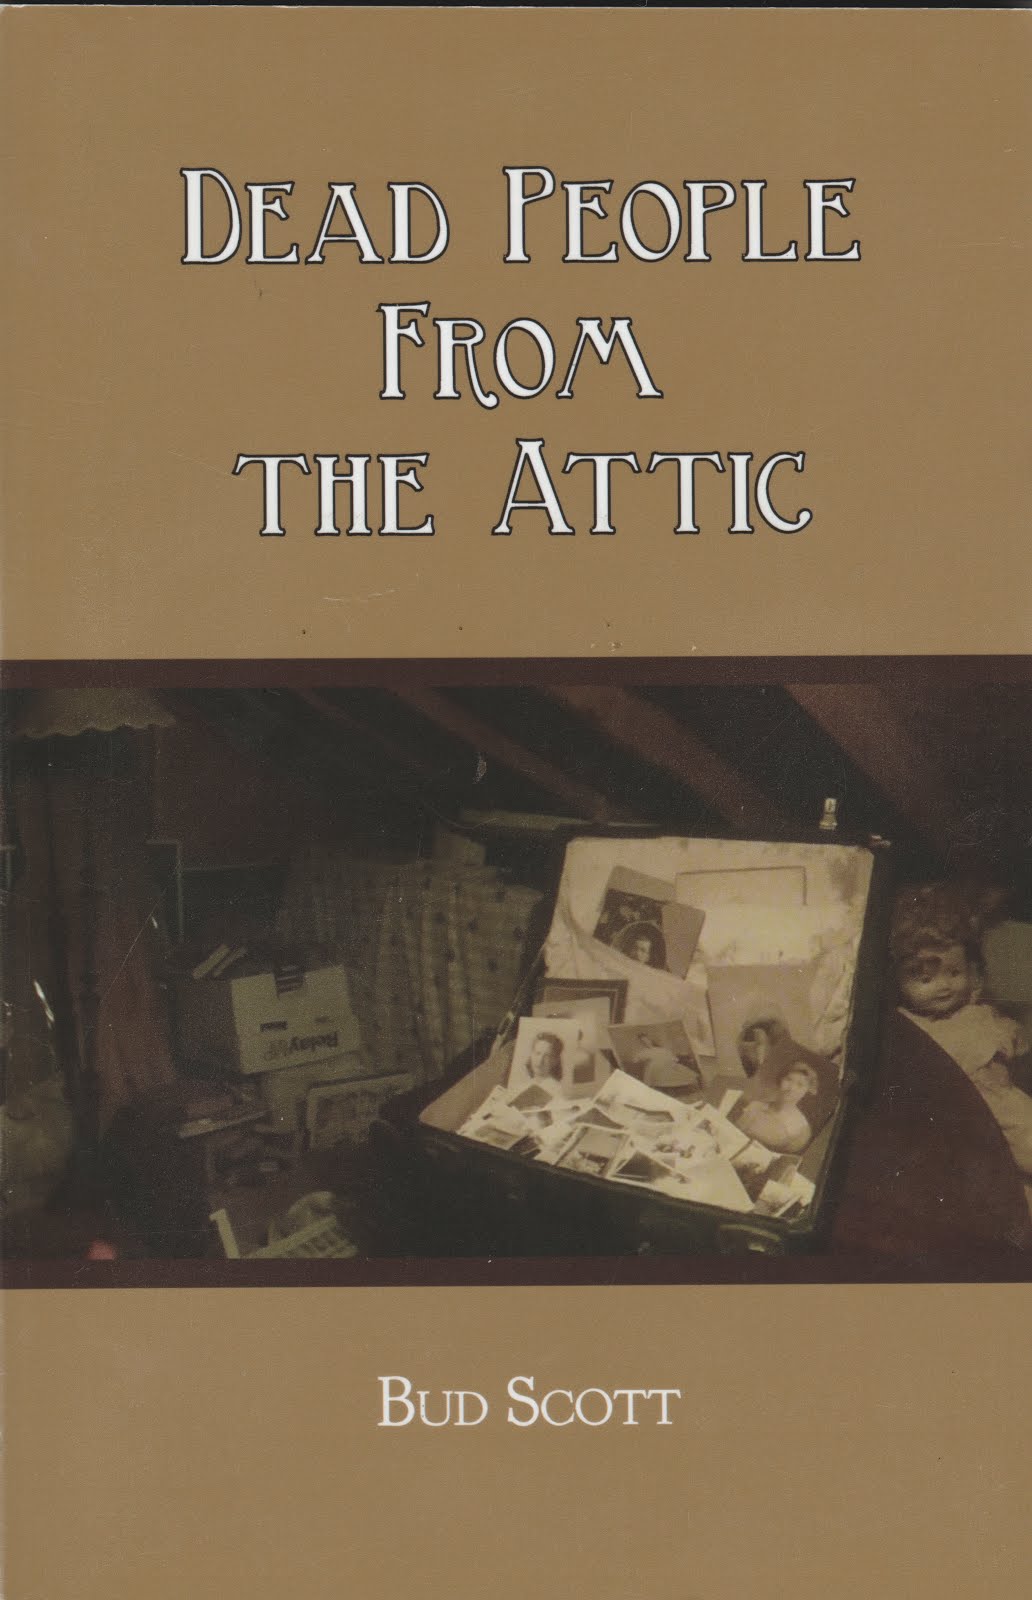 Dead People From the Attic